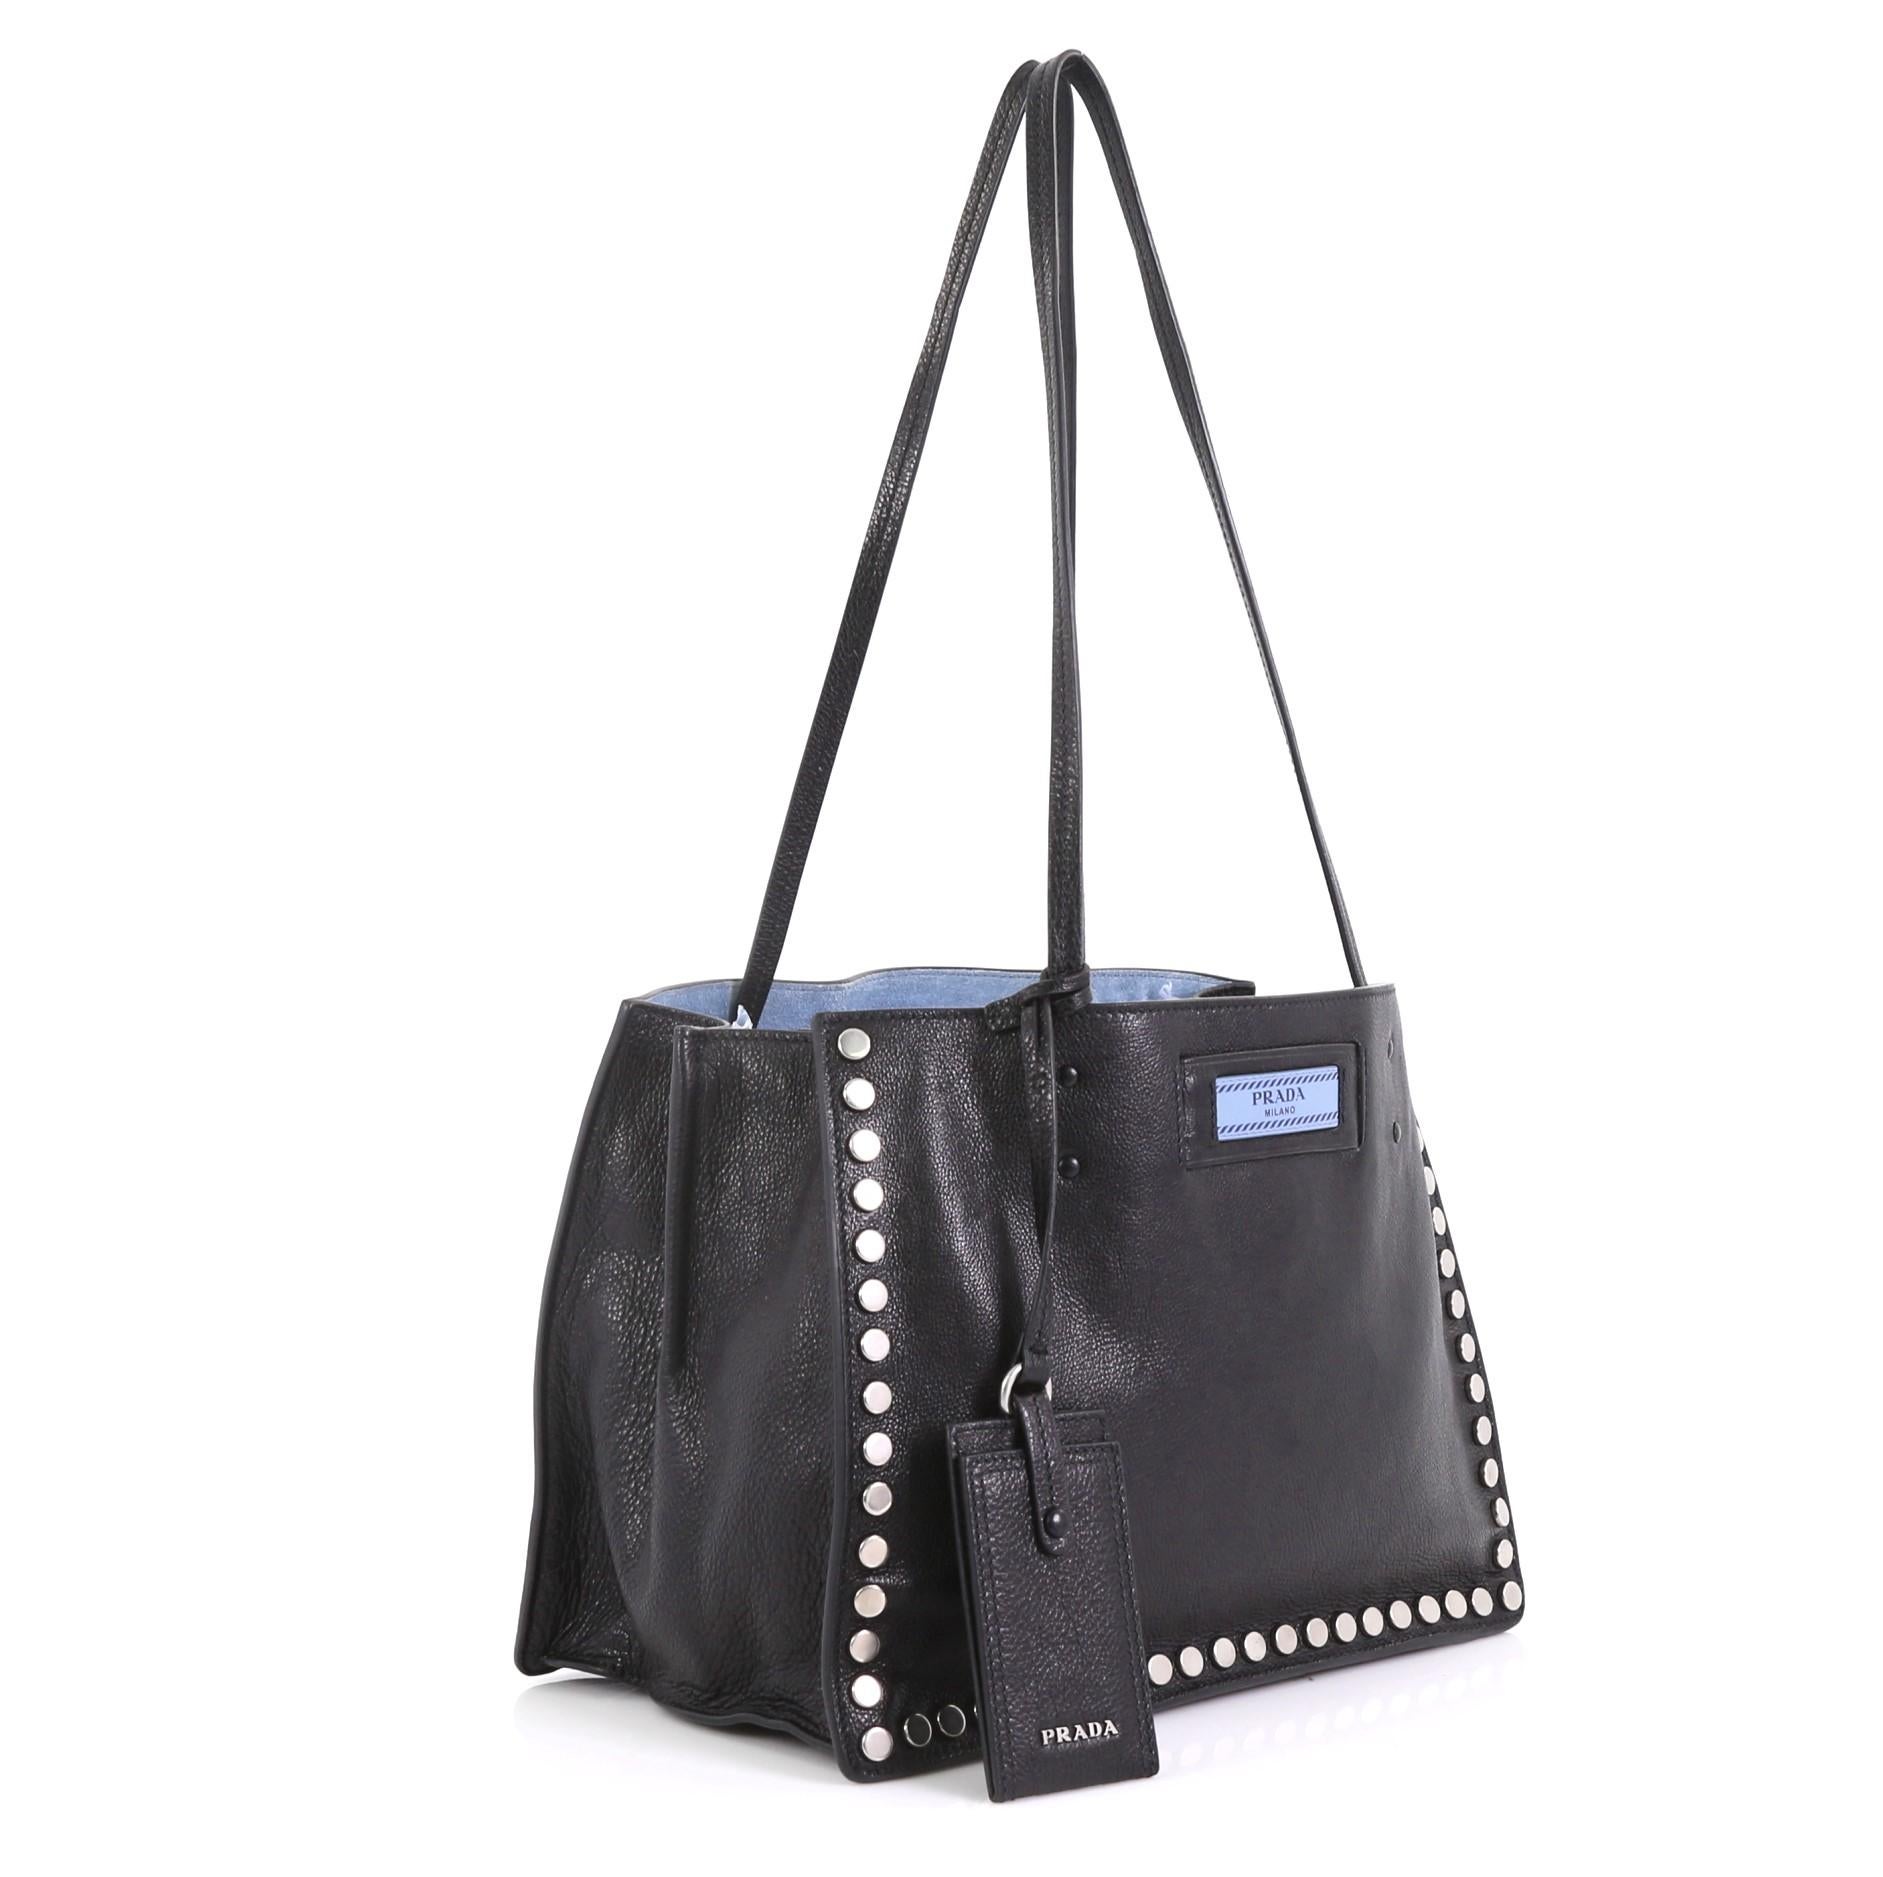 This Prada Etiquette Tote Studded Glace Calfskin Small, crafted from black studded glace calfskin leather, features dual slim leather handles, Prada logo at the front and silver-tone hardware. Its wide open top showcases a blue suede interior with a